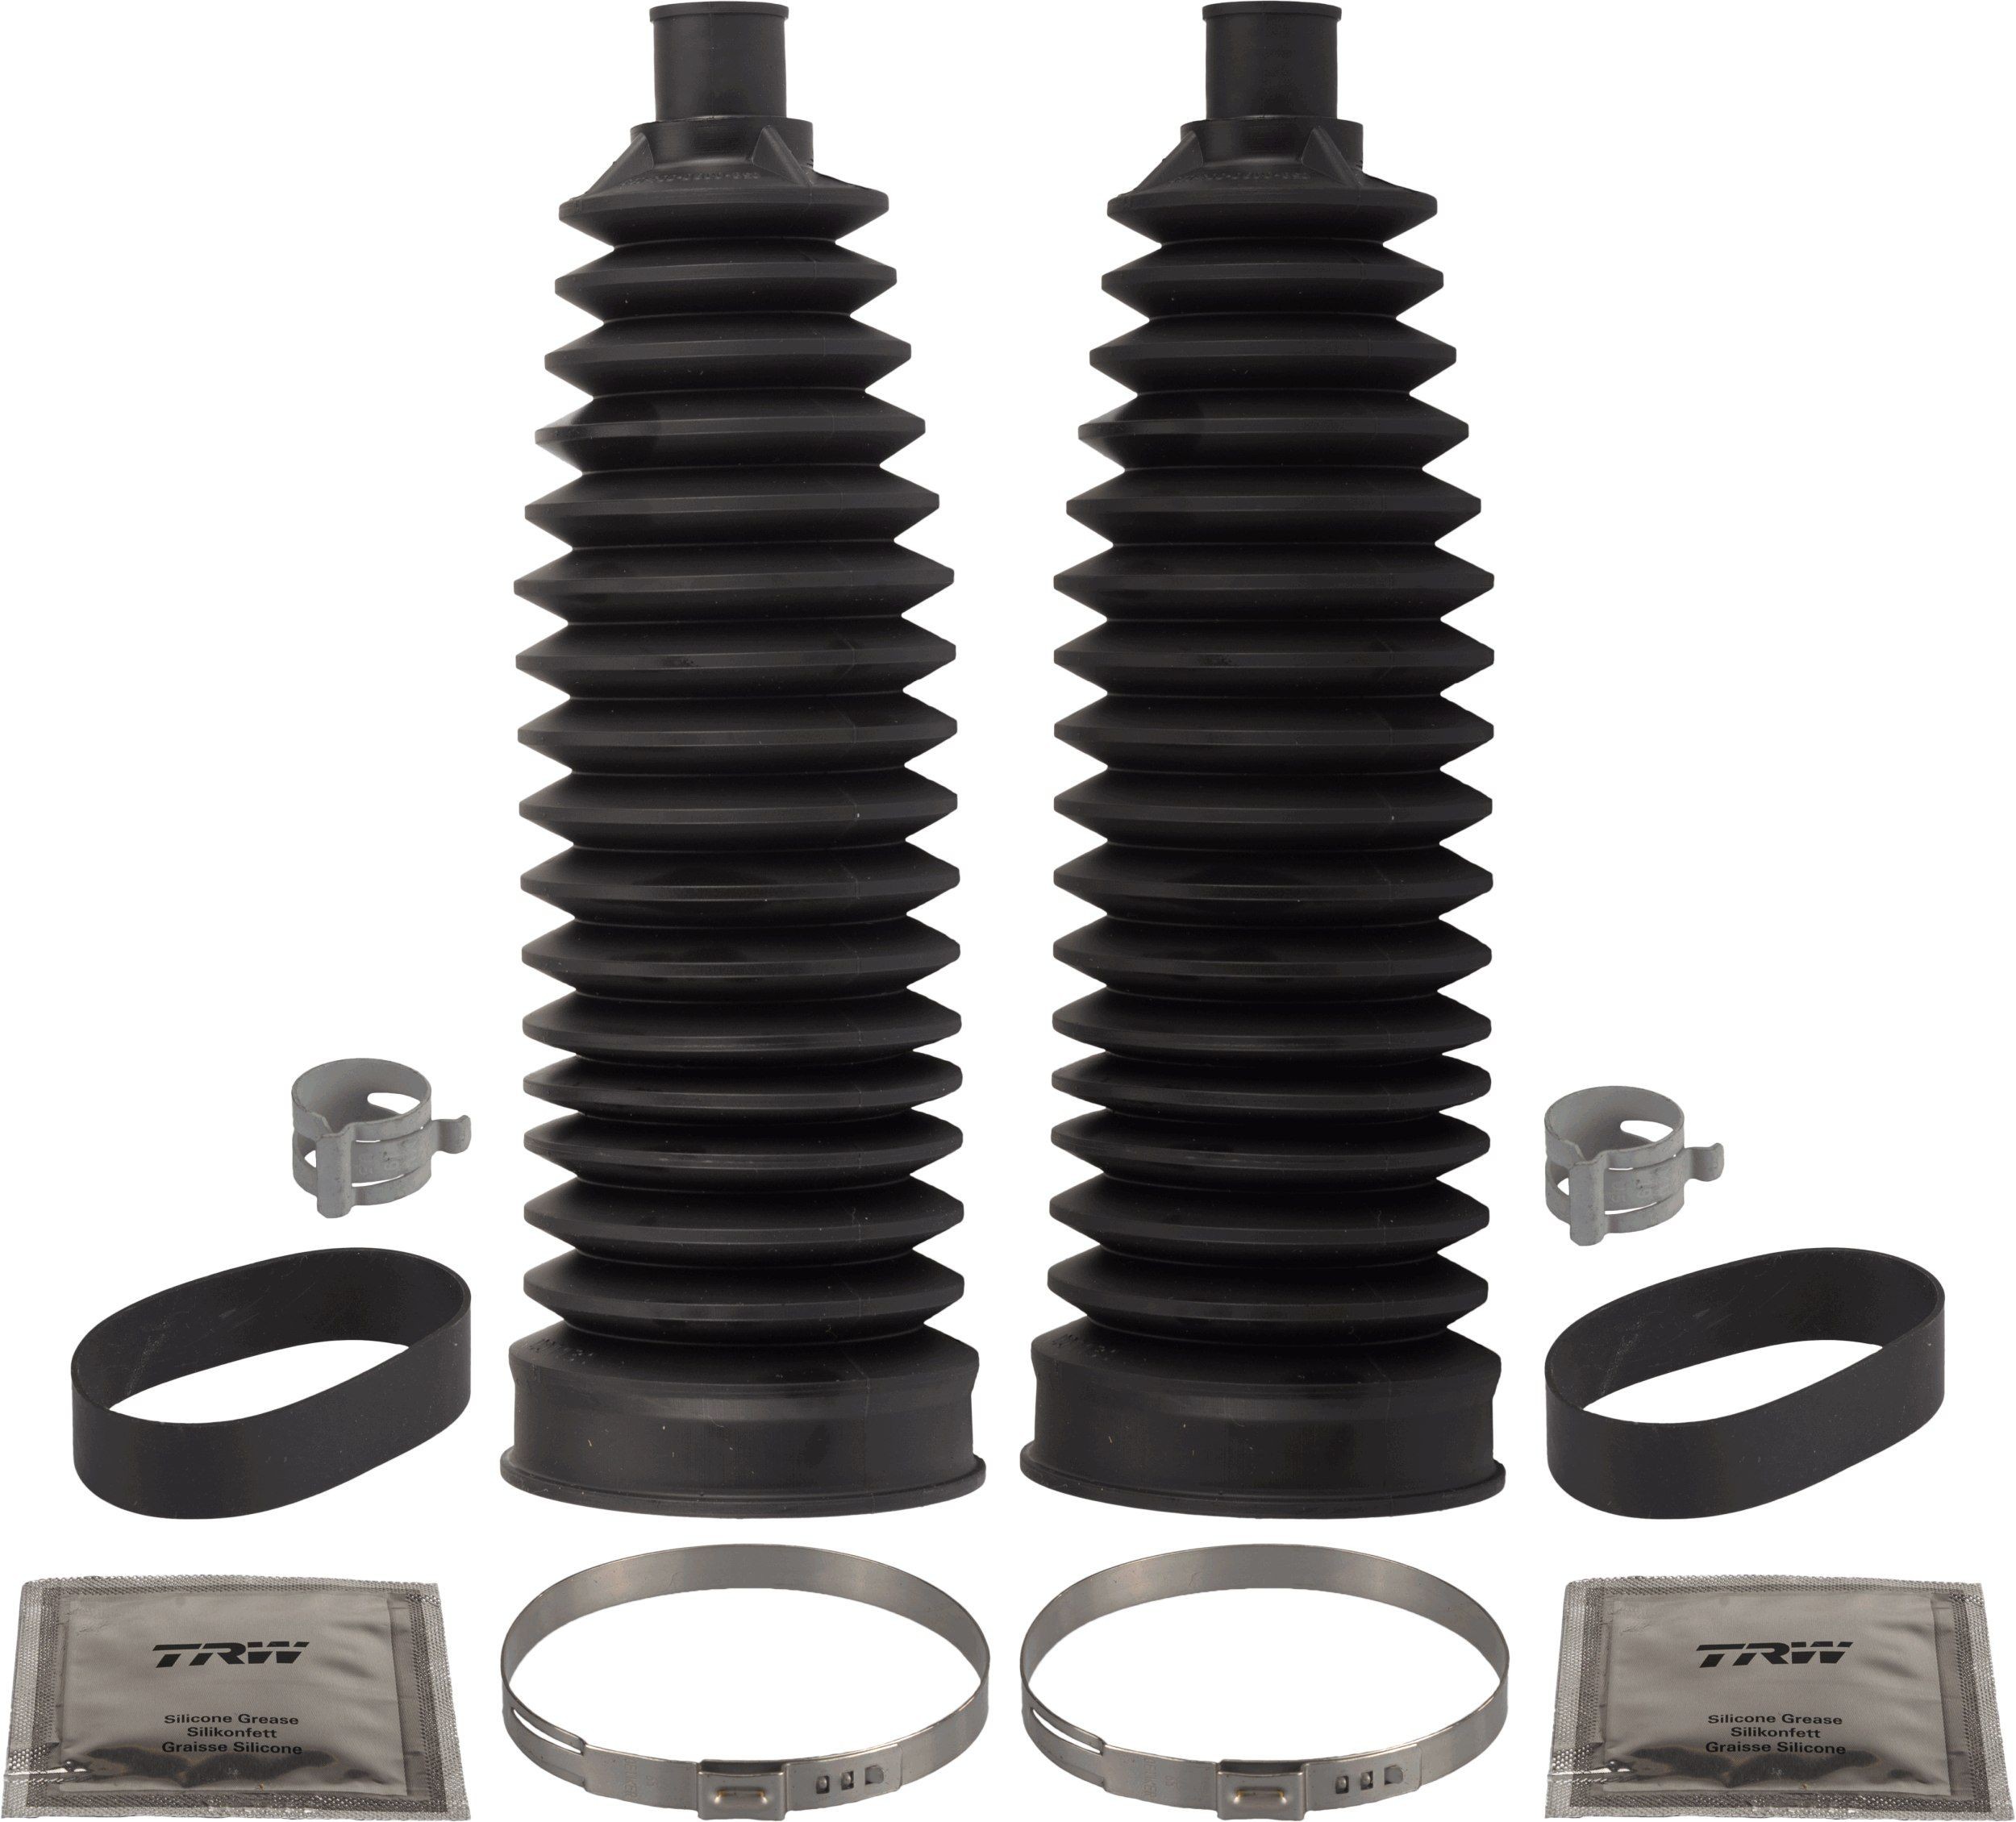 Original TRW Rack and pinion bellow JBE226 for BMW 5 Series